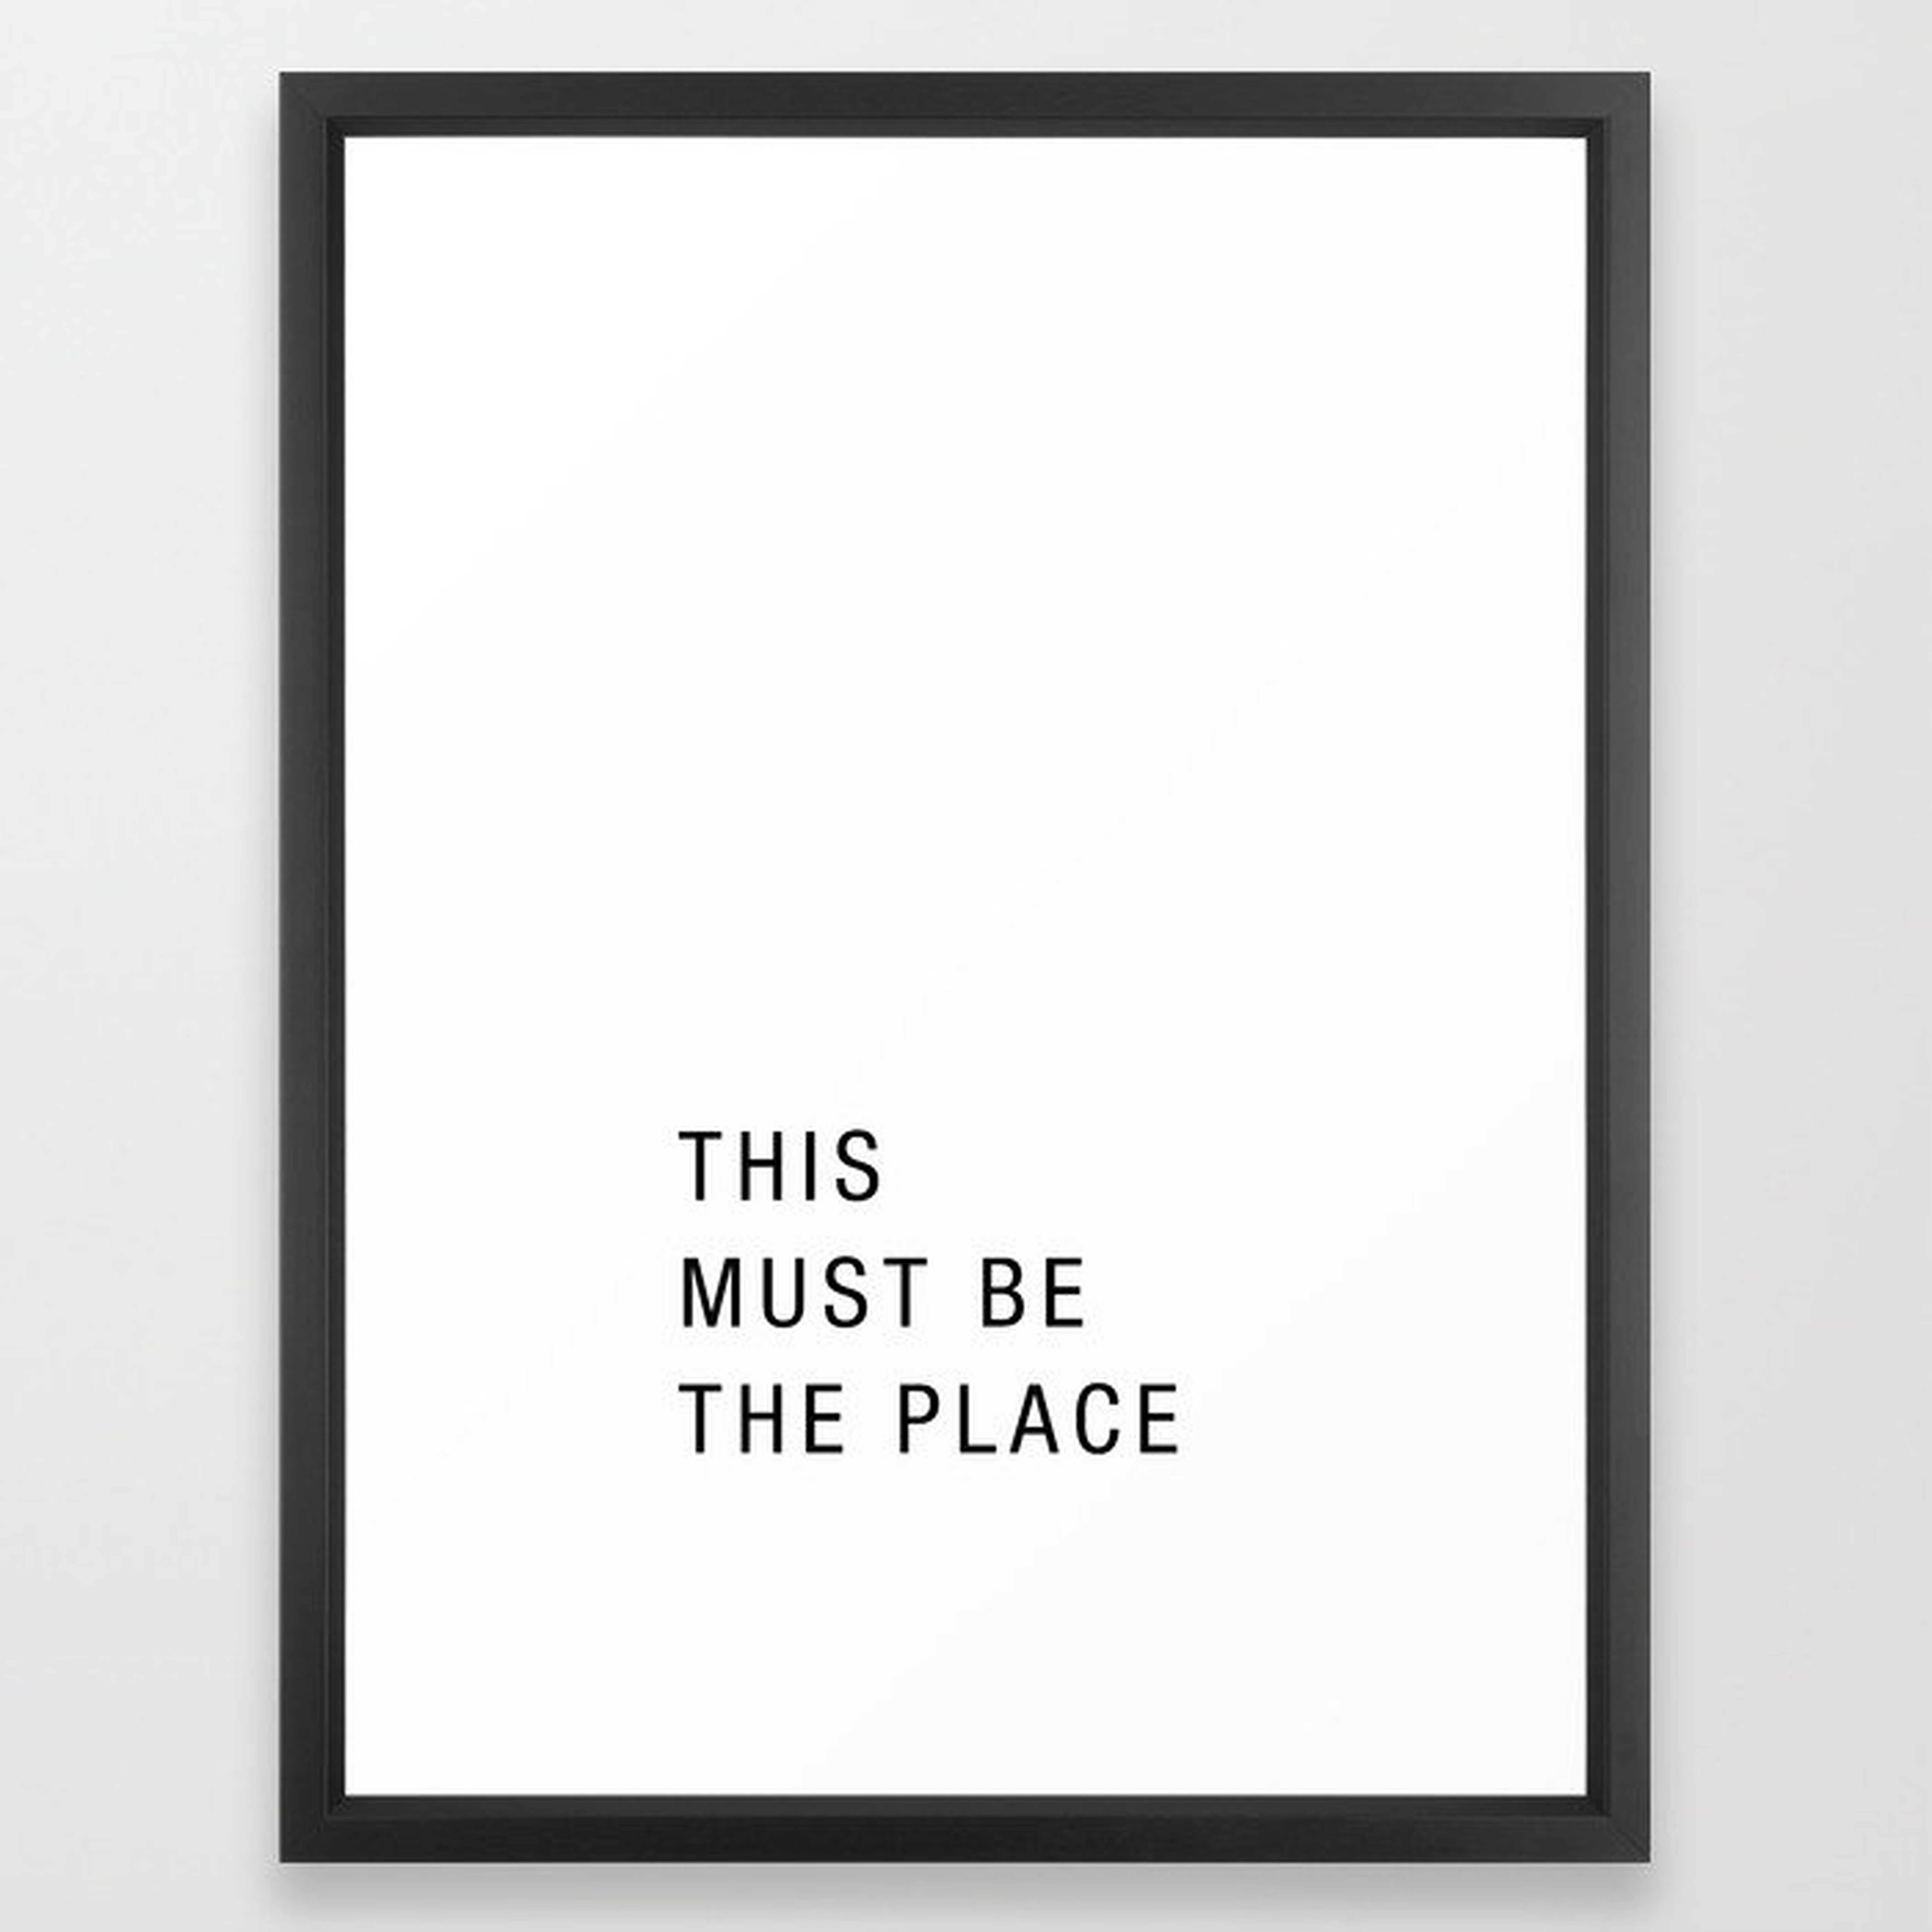 This must be the place Framed Art Print by Standard Prints - Society6